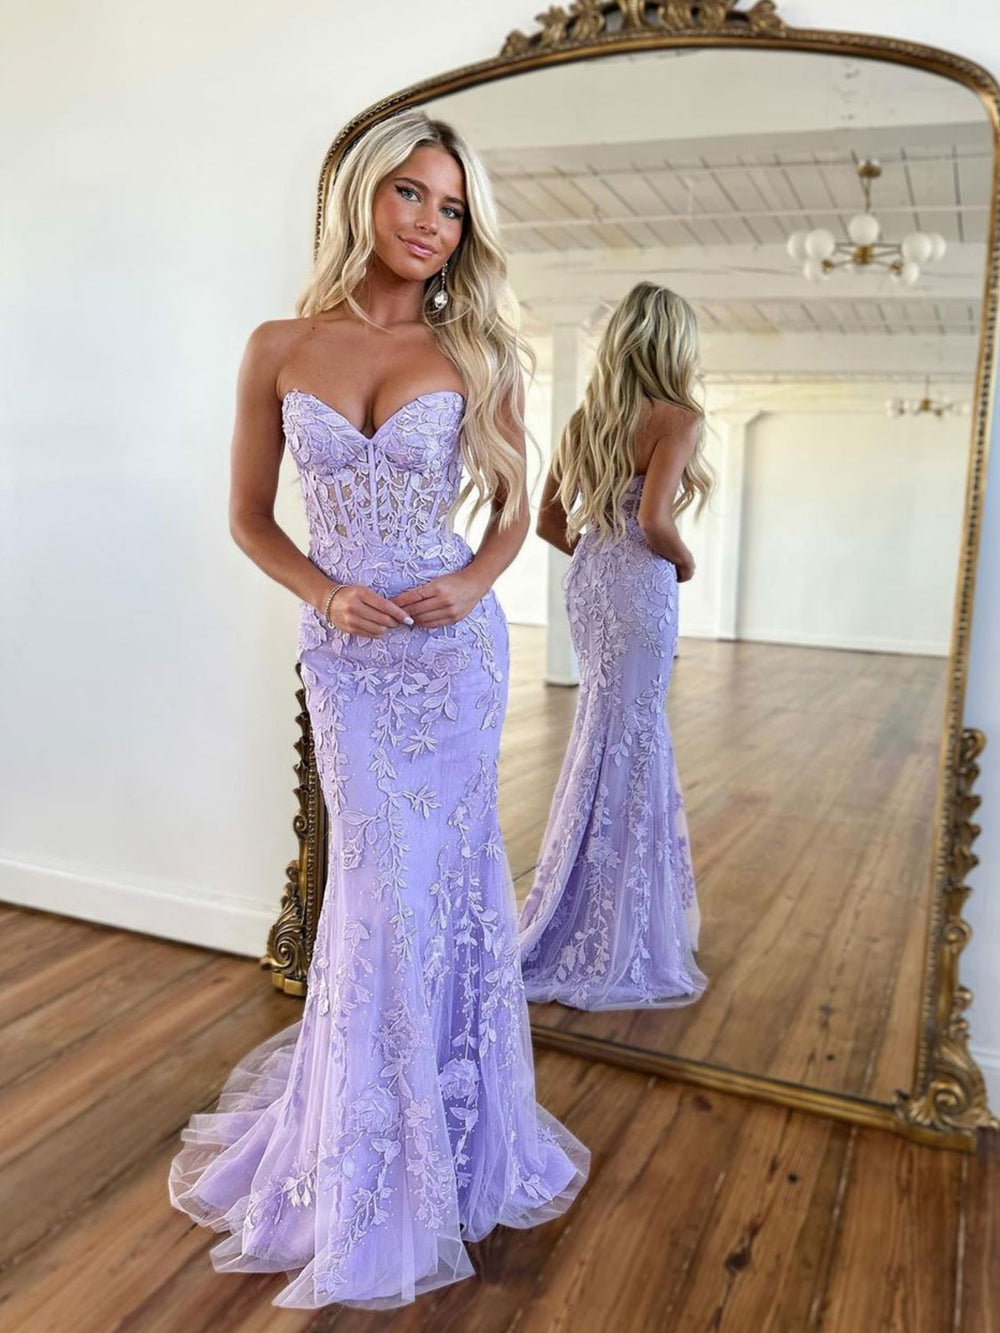 💜🌸Crystal work Purple Lilac lavender netted long dress gown🌸💜 –  tarangg.in